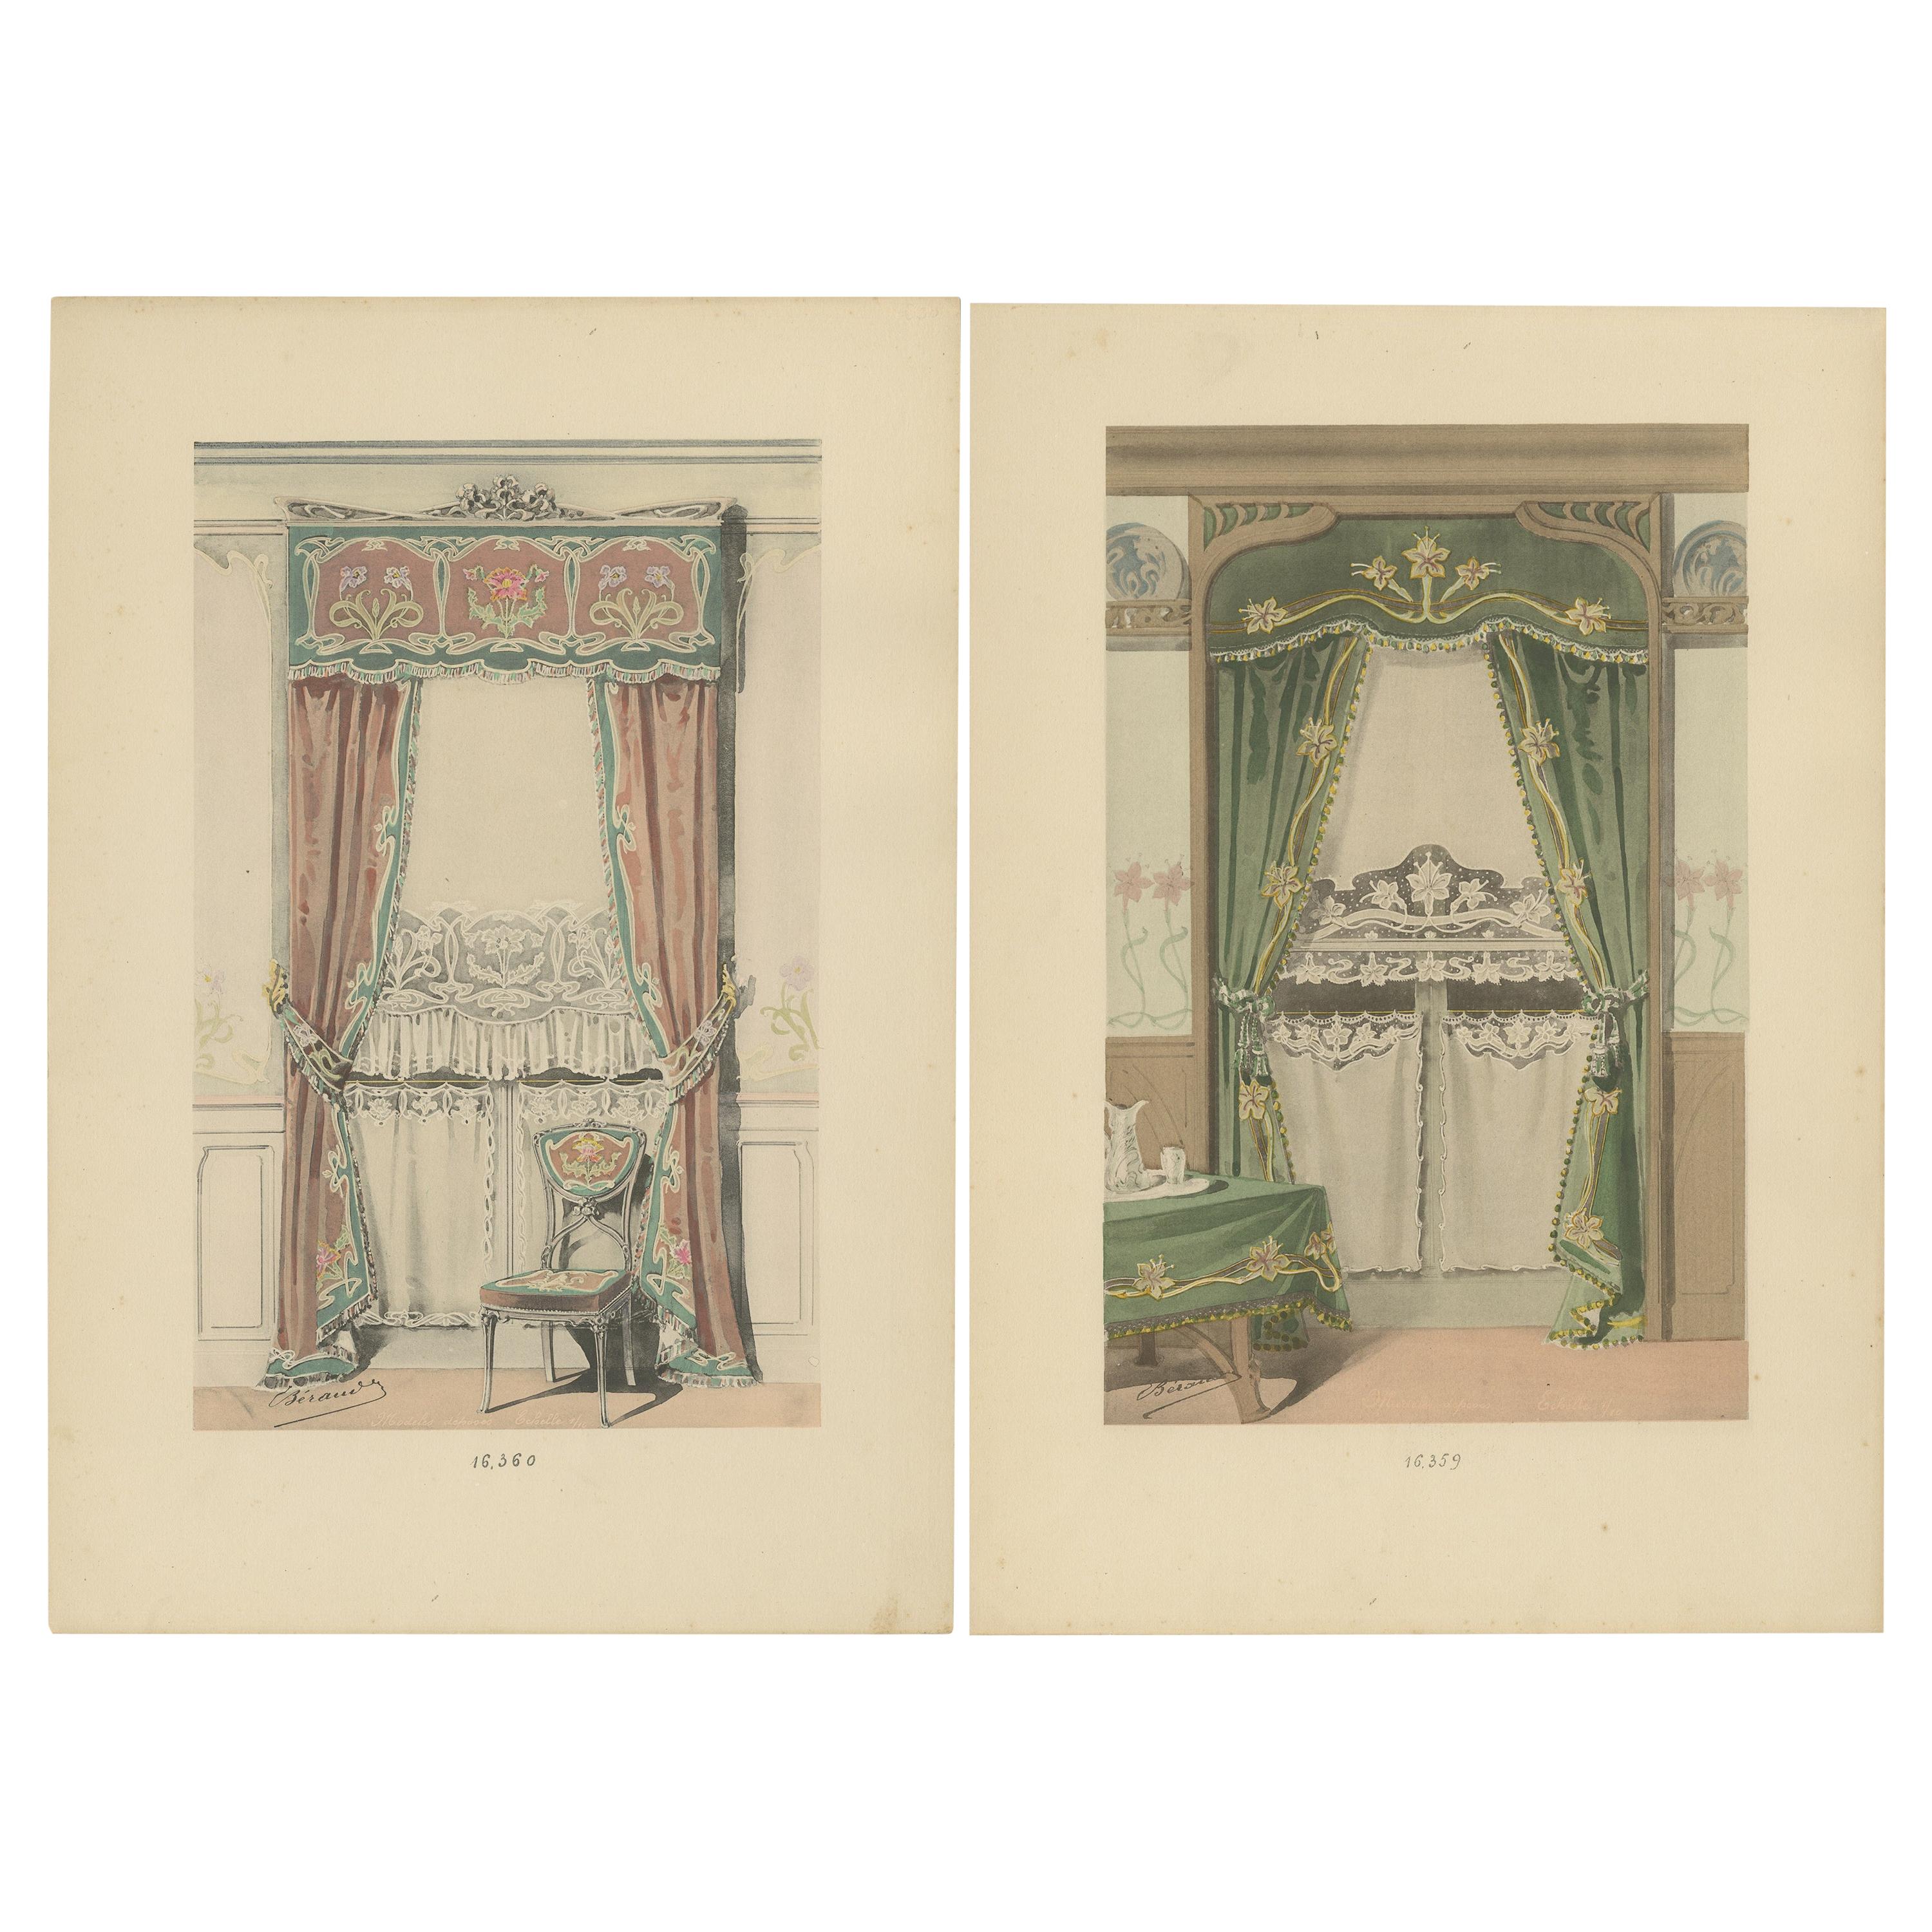 Set of 2 Antique Prints of Window Dressings and Furniture by Beraud, 'c.1890'